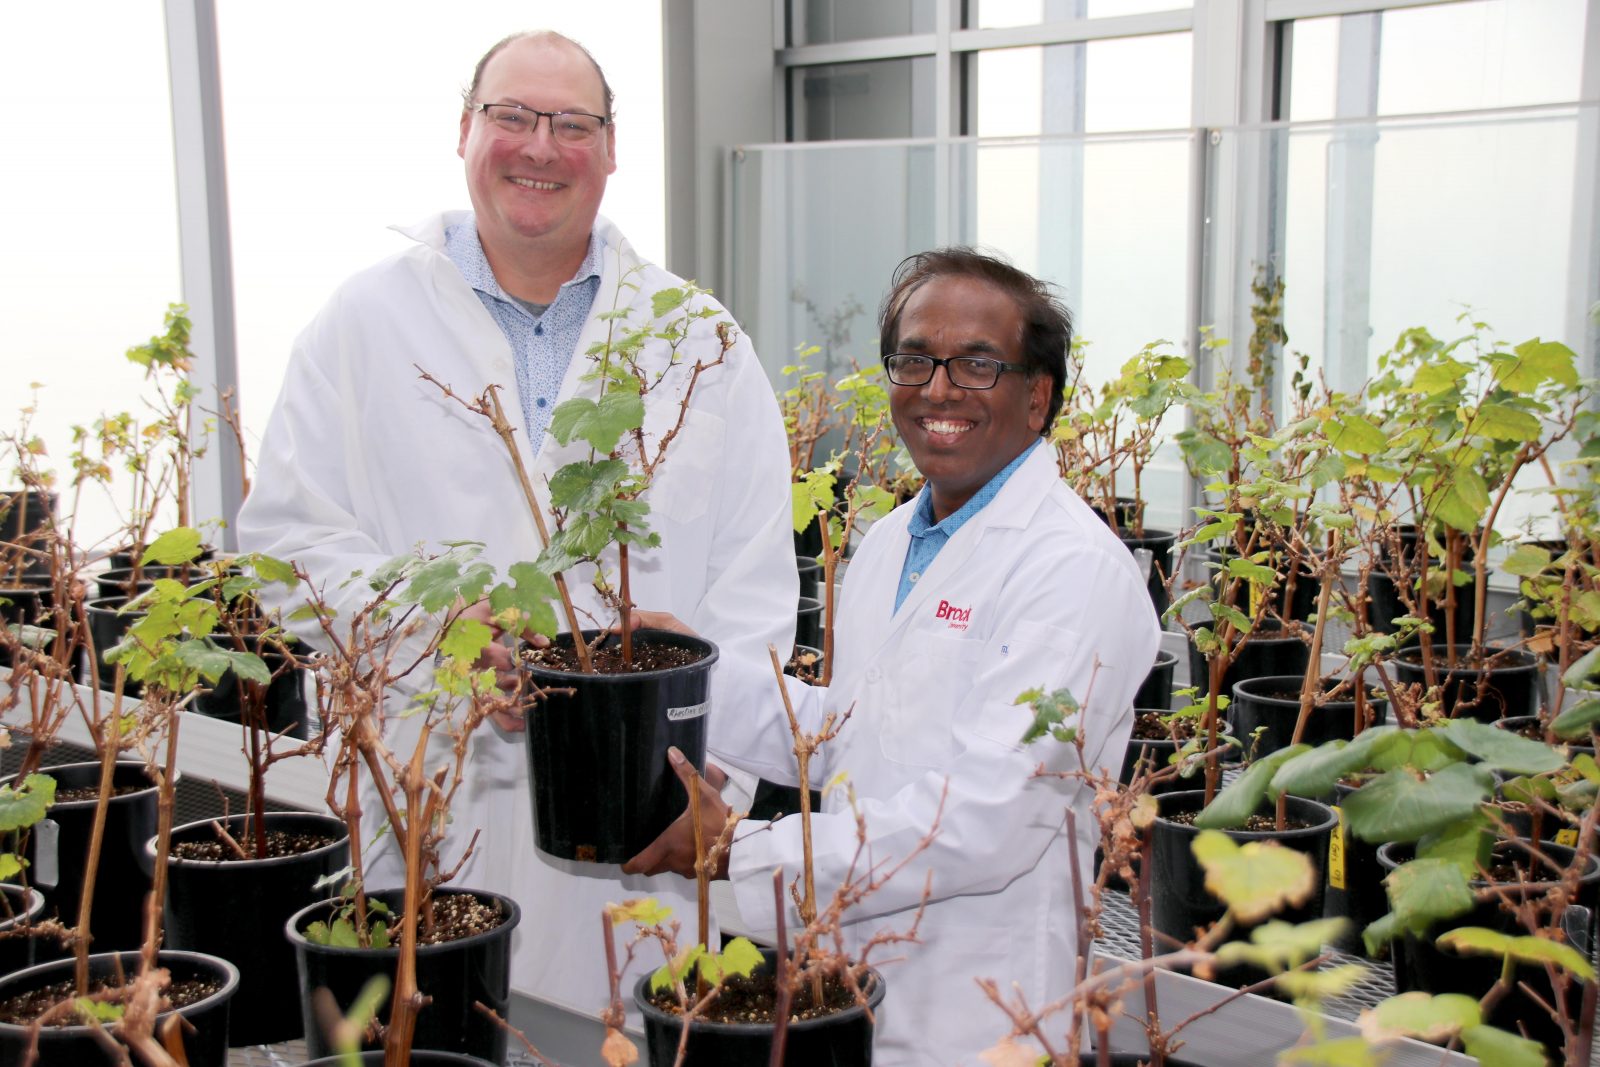 Assistant Professor of Biological Sciences, Jim Willwerth (left) and Principal Scientist, Sudarsana Poojari (right), dressed in while lab coats, stand side-by-side holding a potted plant in the middle of rows of plants in a greenhouse-type setting.